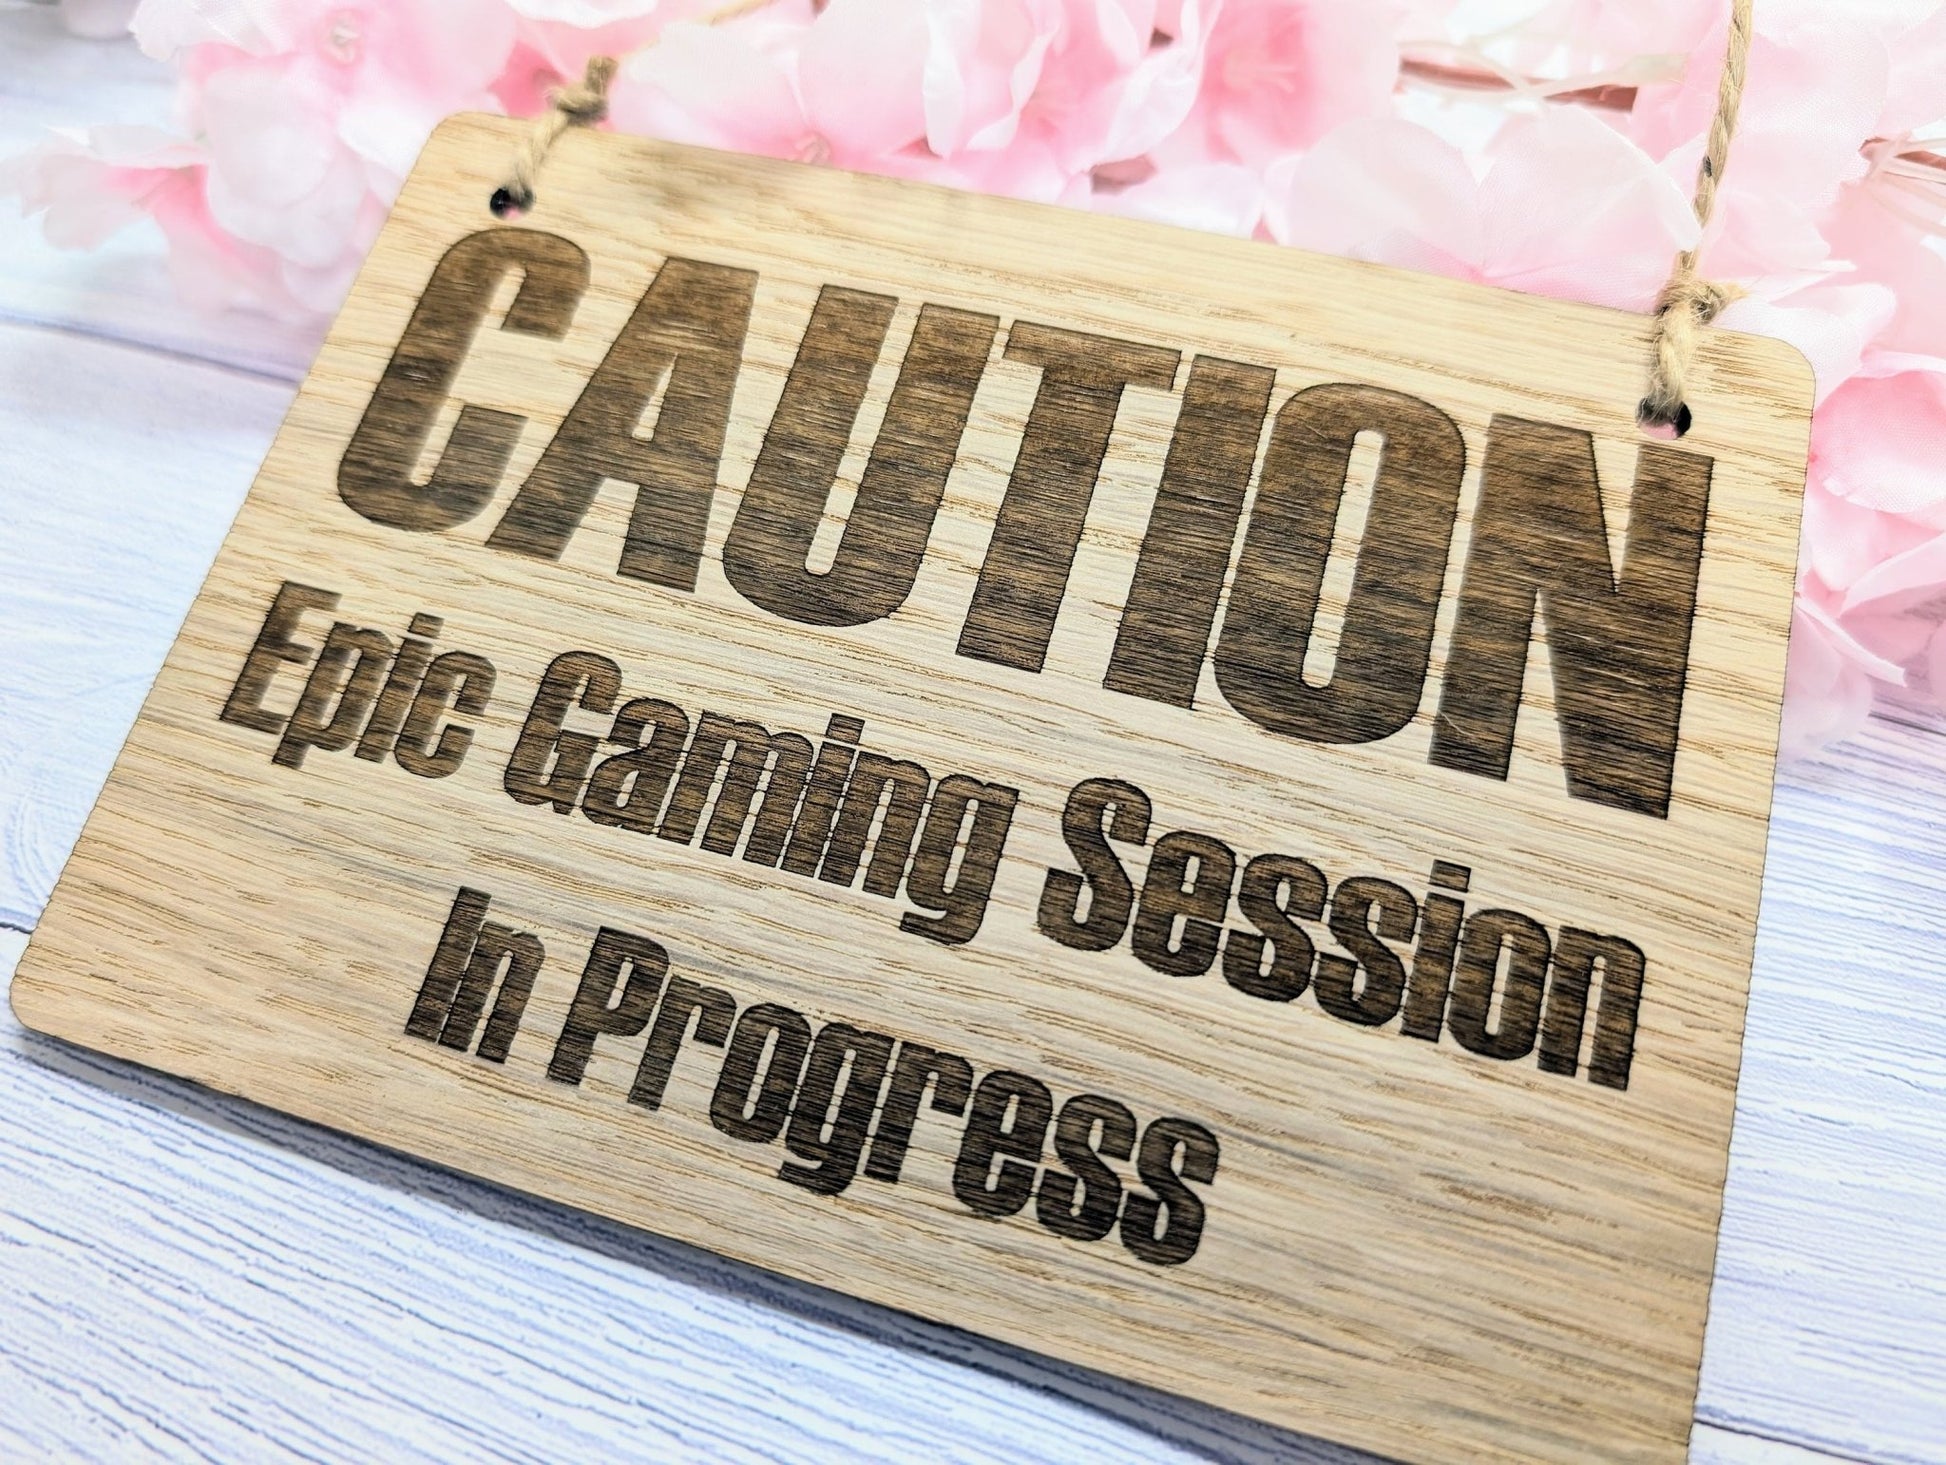 Warning - Epic Gaming Session in Progress - Wooden Sign - CherryGroveCraft